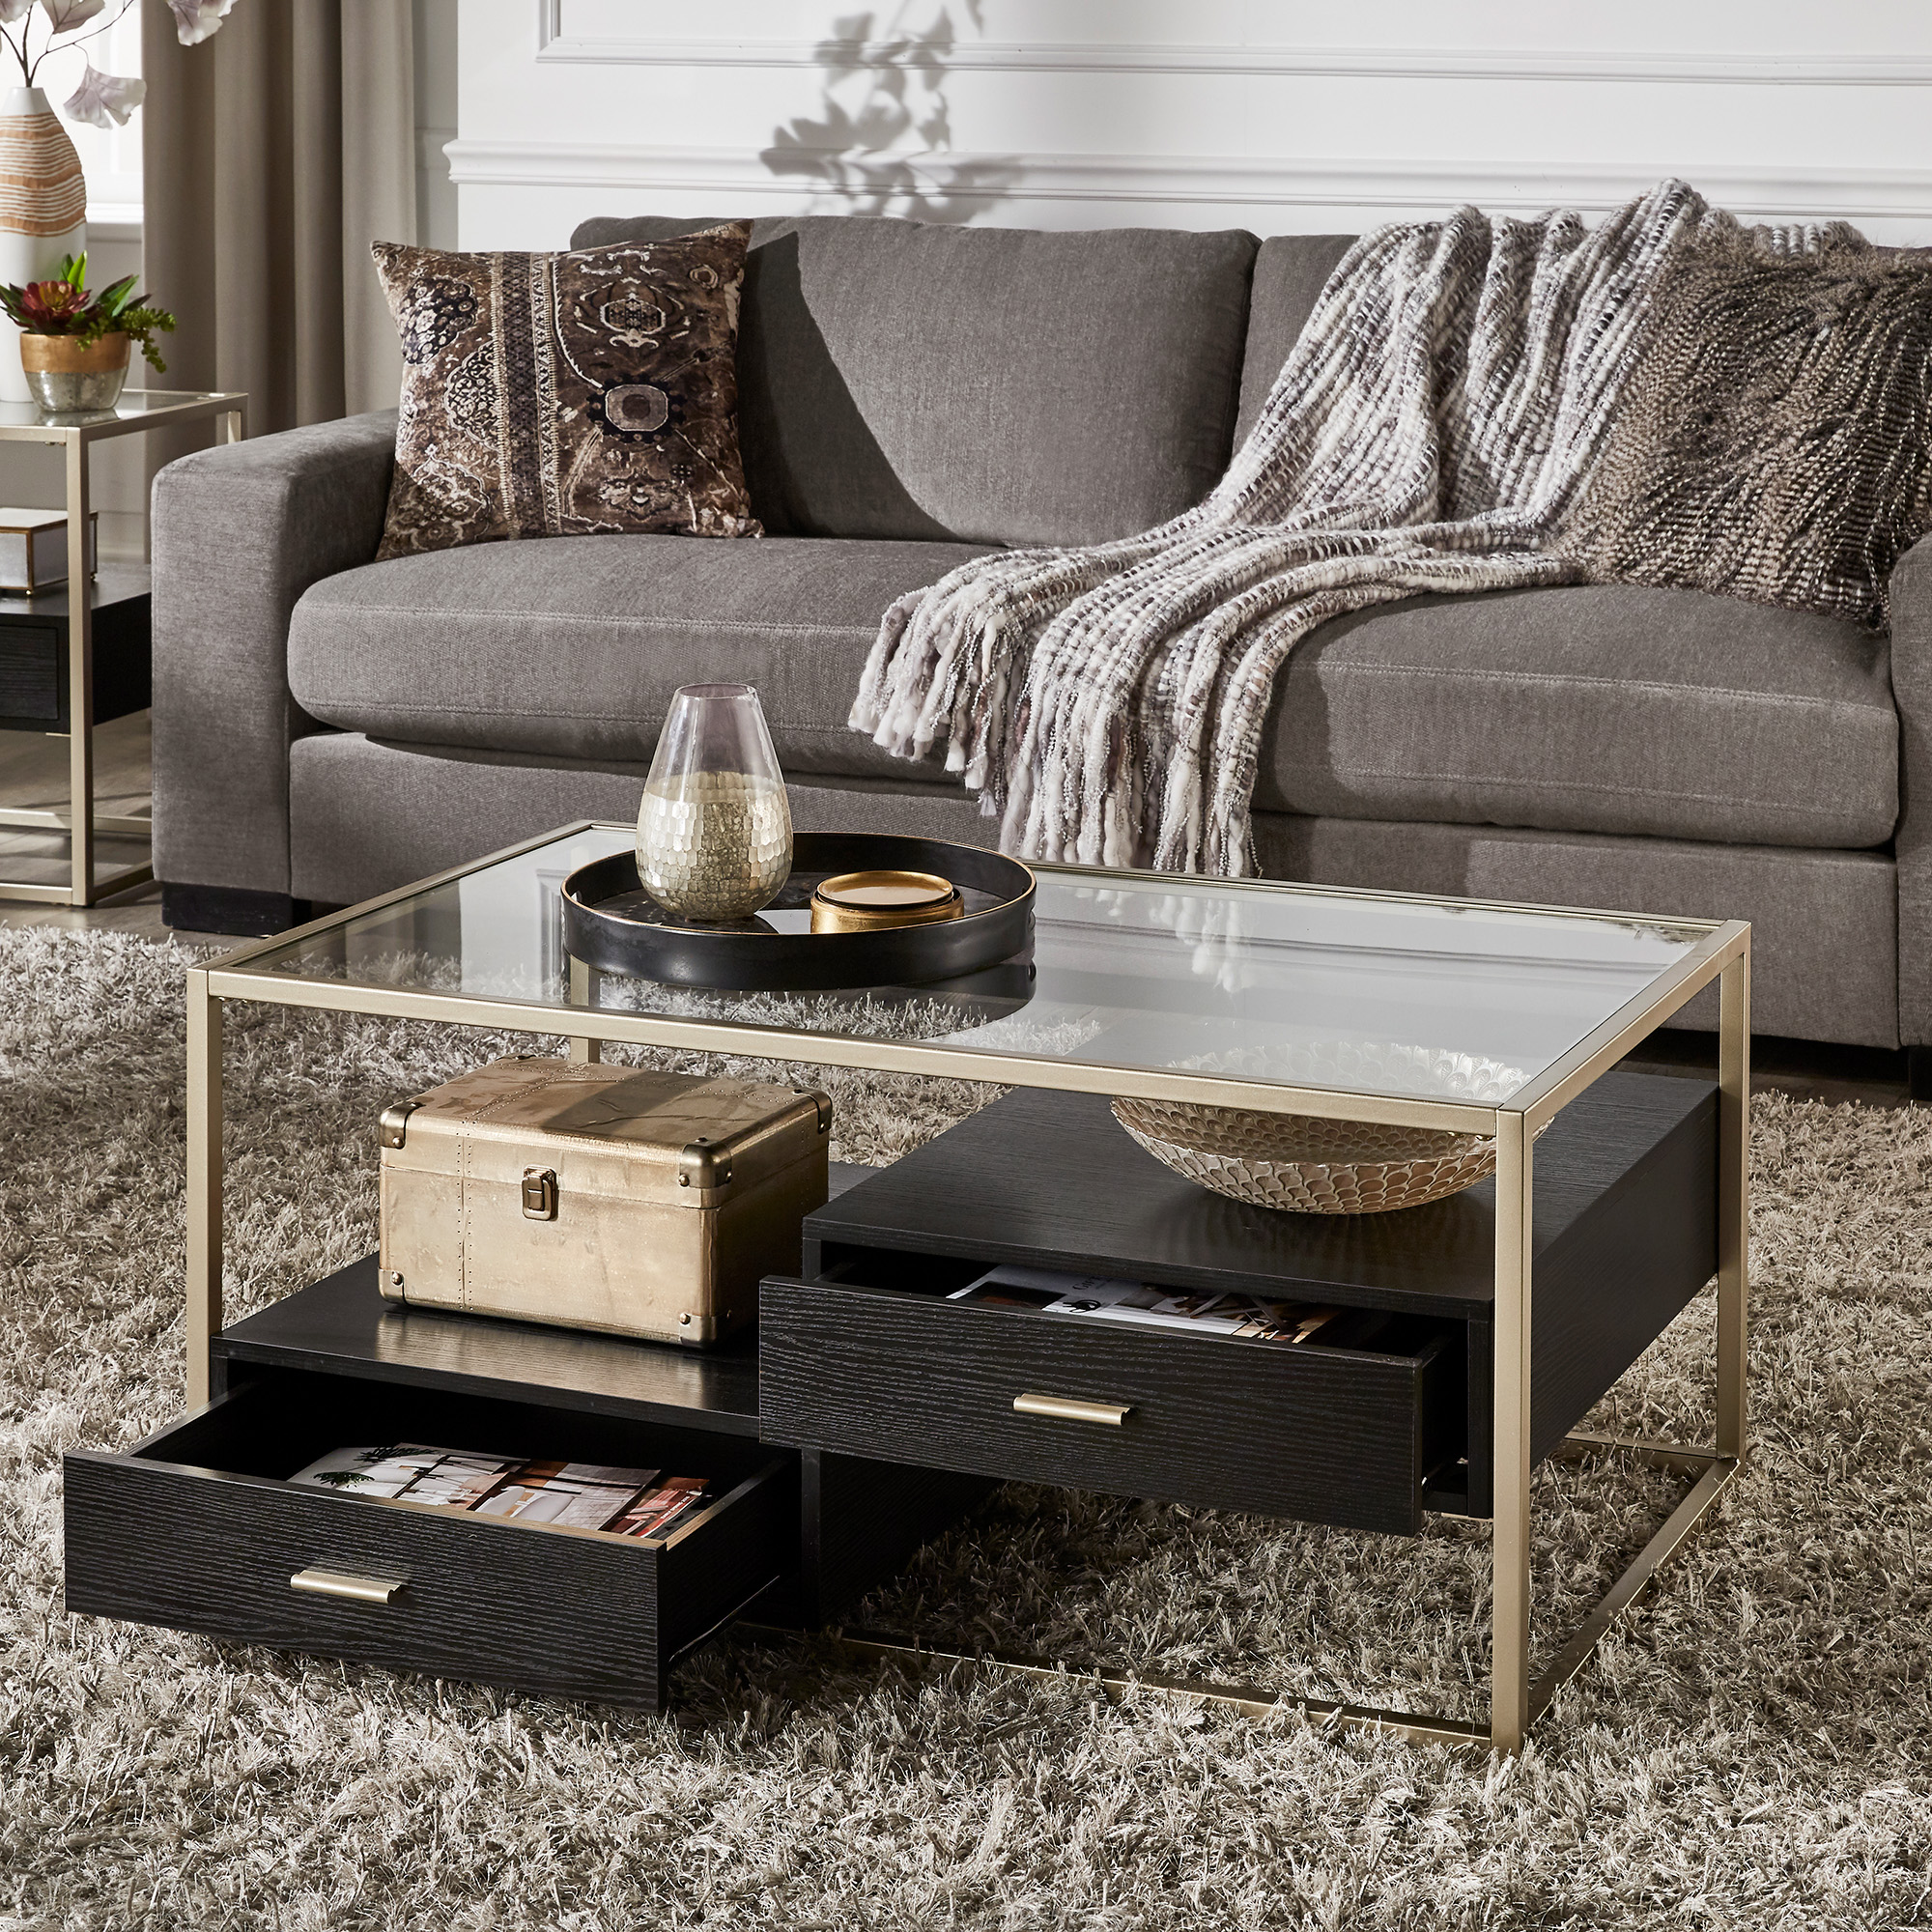 Champagne Silver Finish Table with Storage